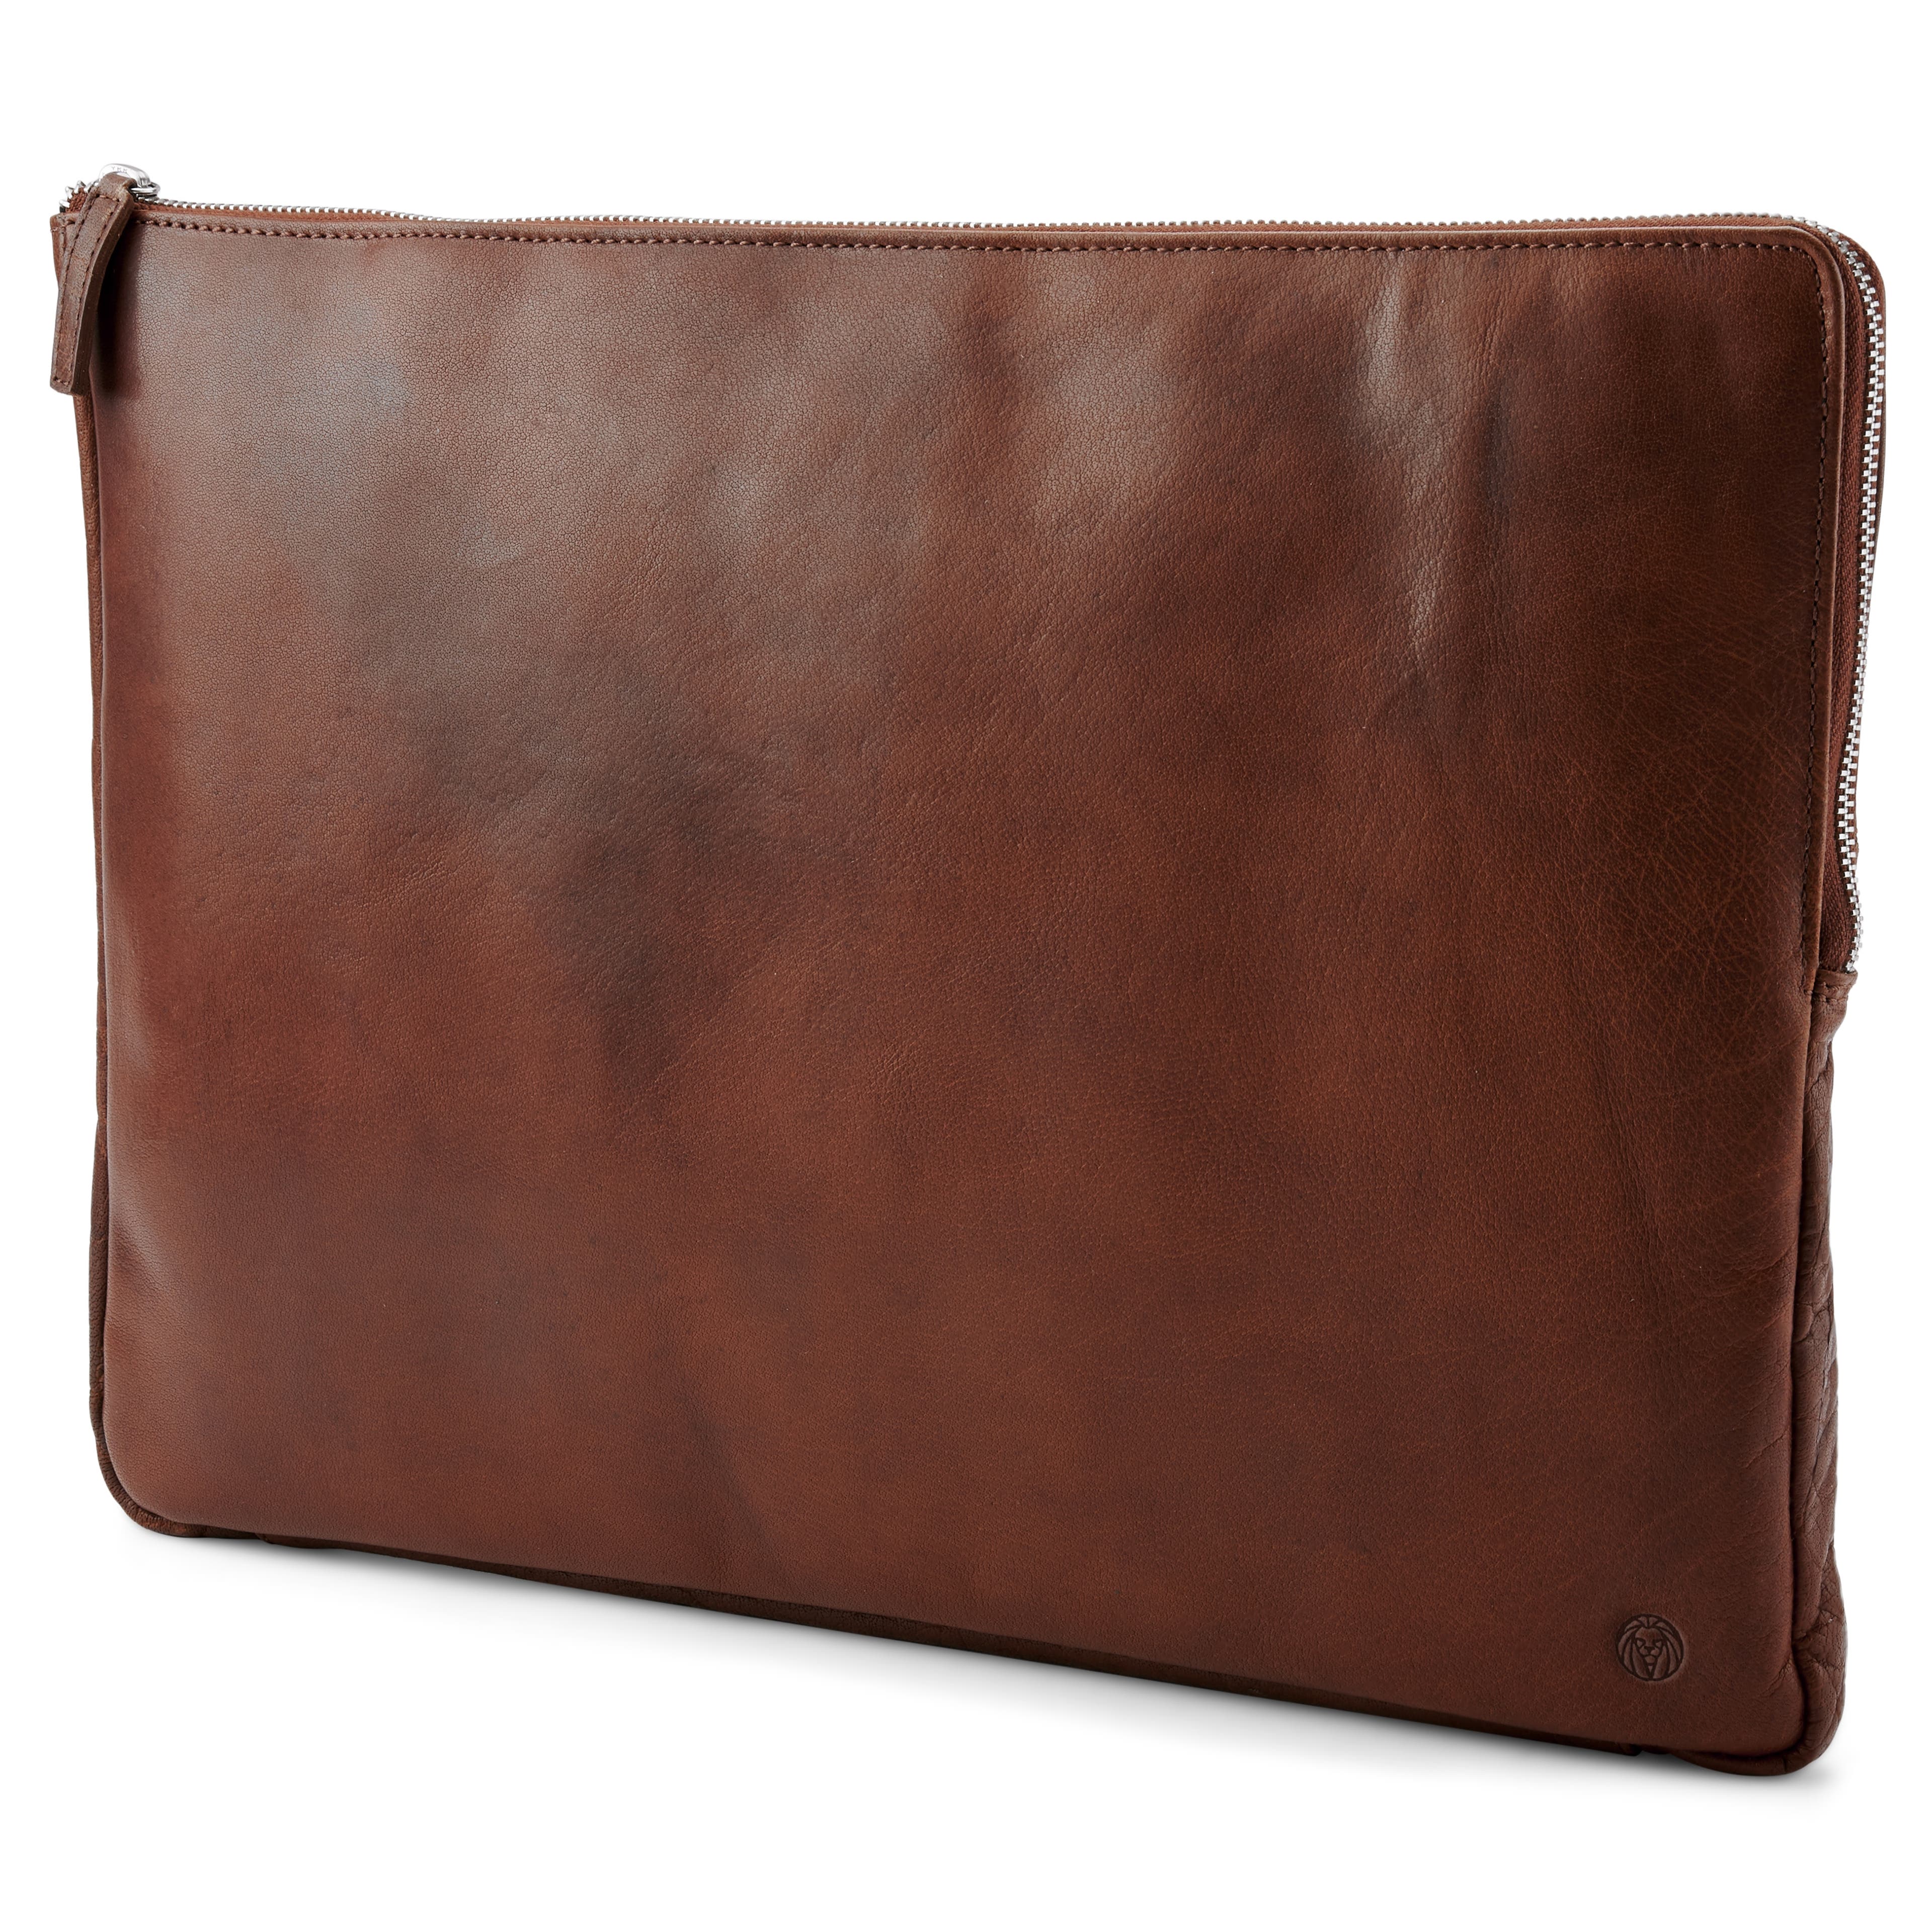 Montreal Tan Leather Laptop Sleeve